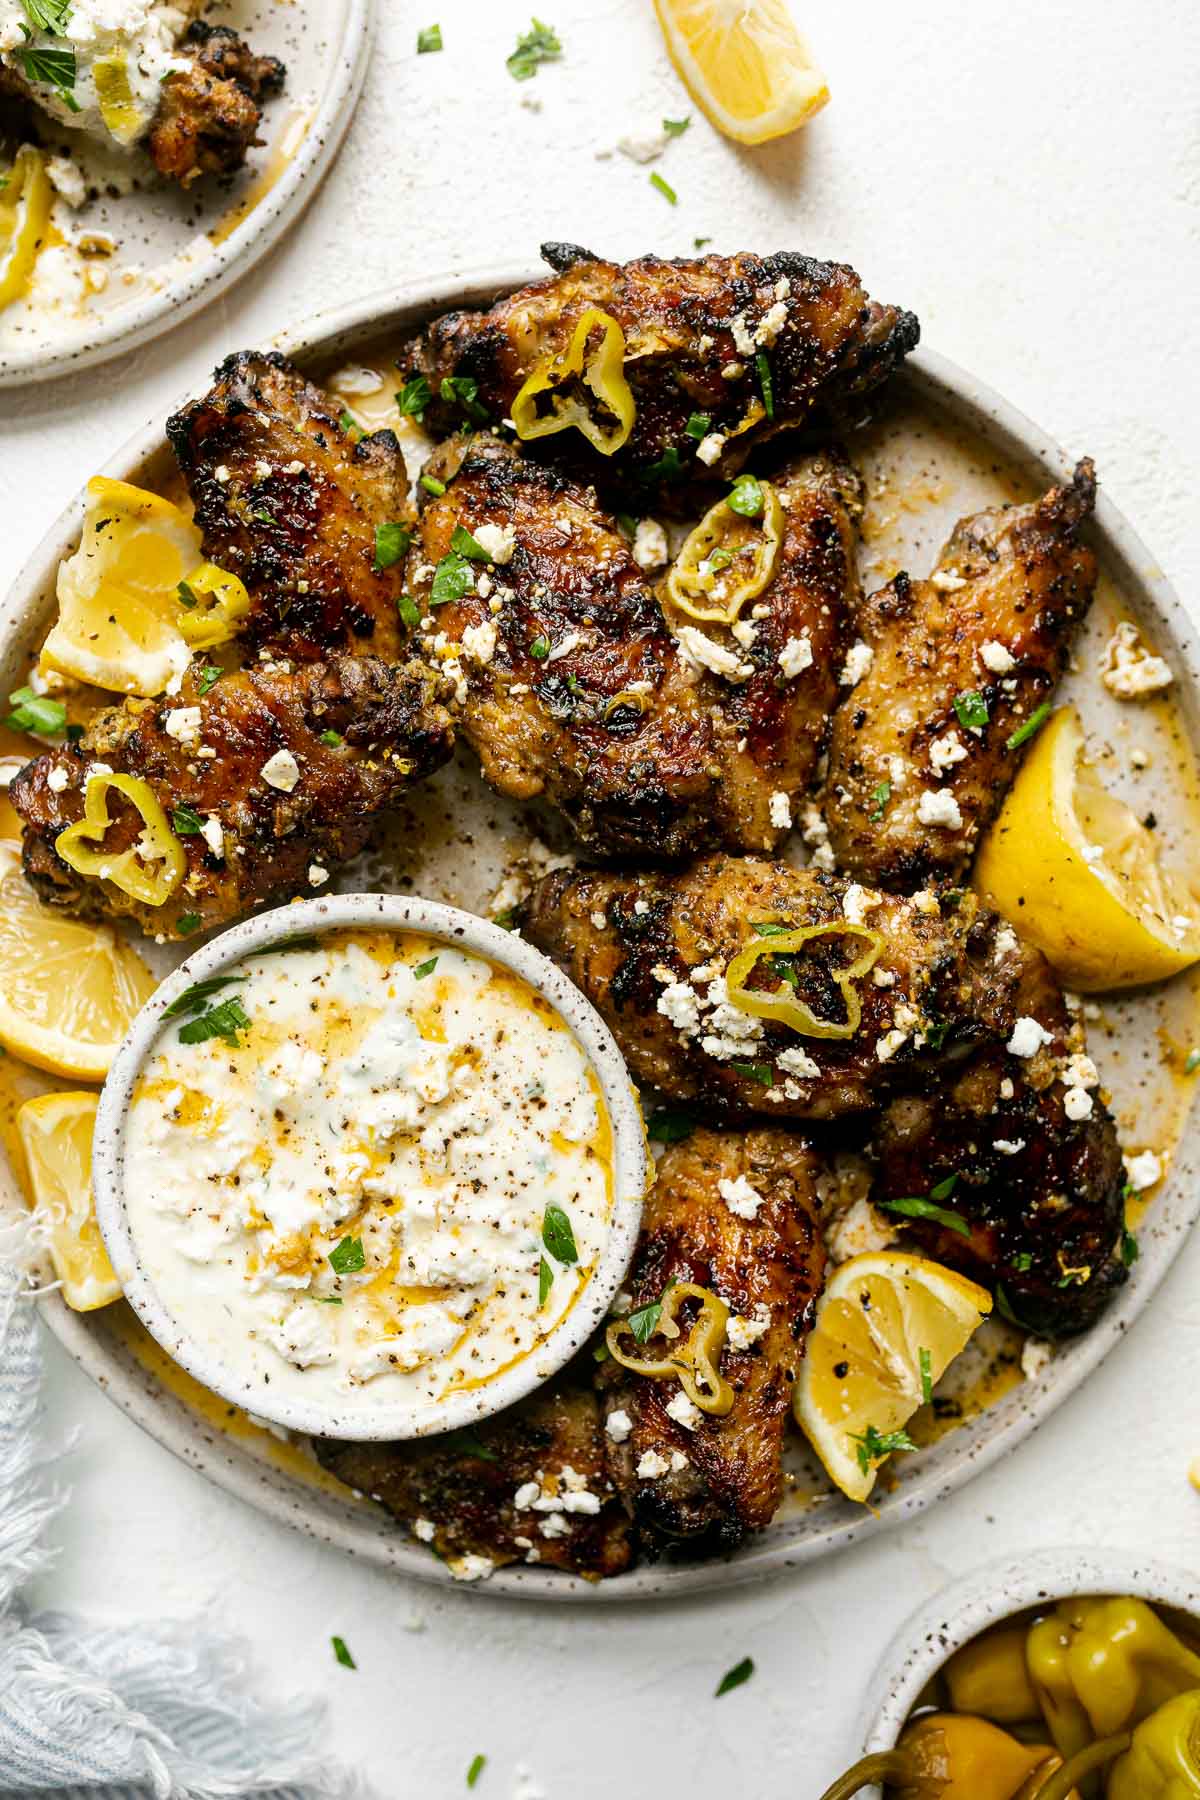 Lemony Grilled Greek Wings with Whipped Feta Dip